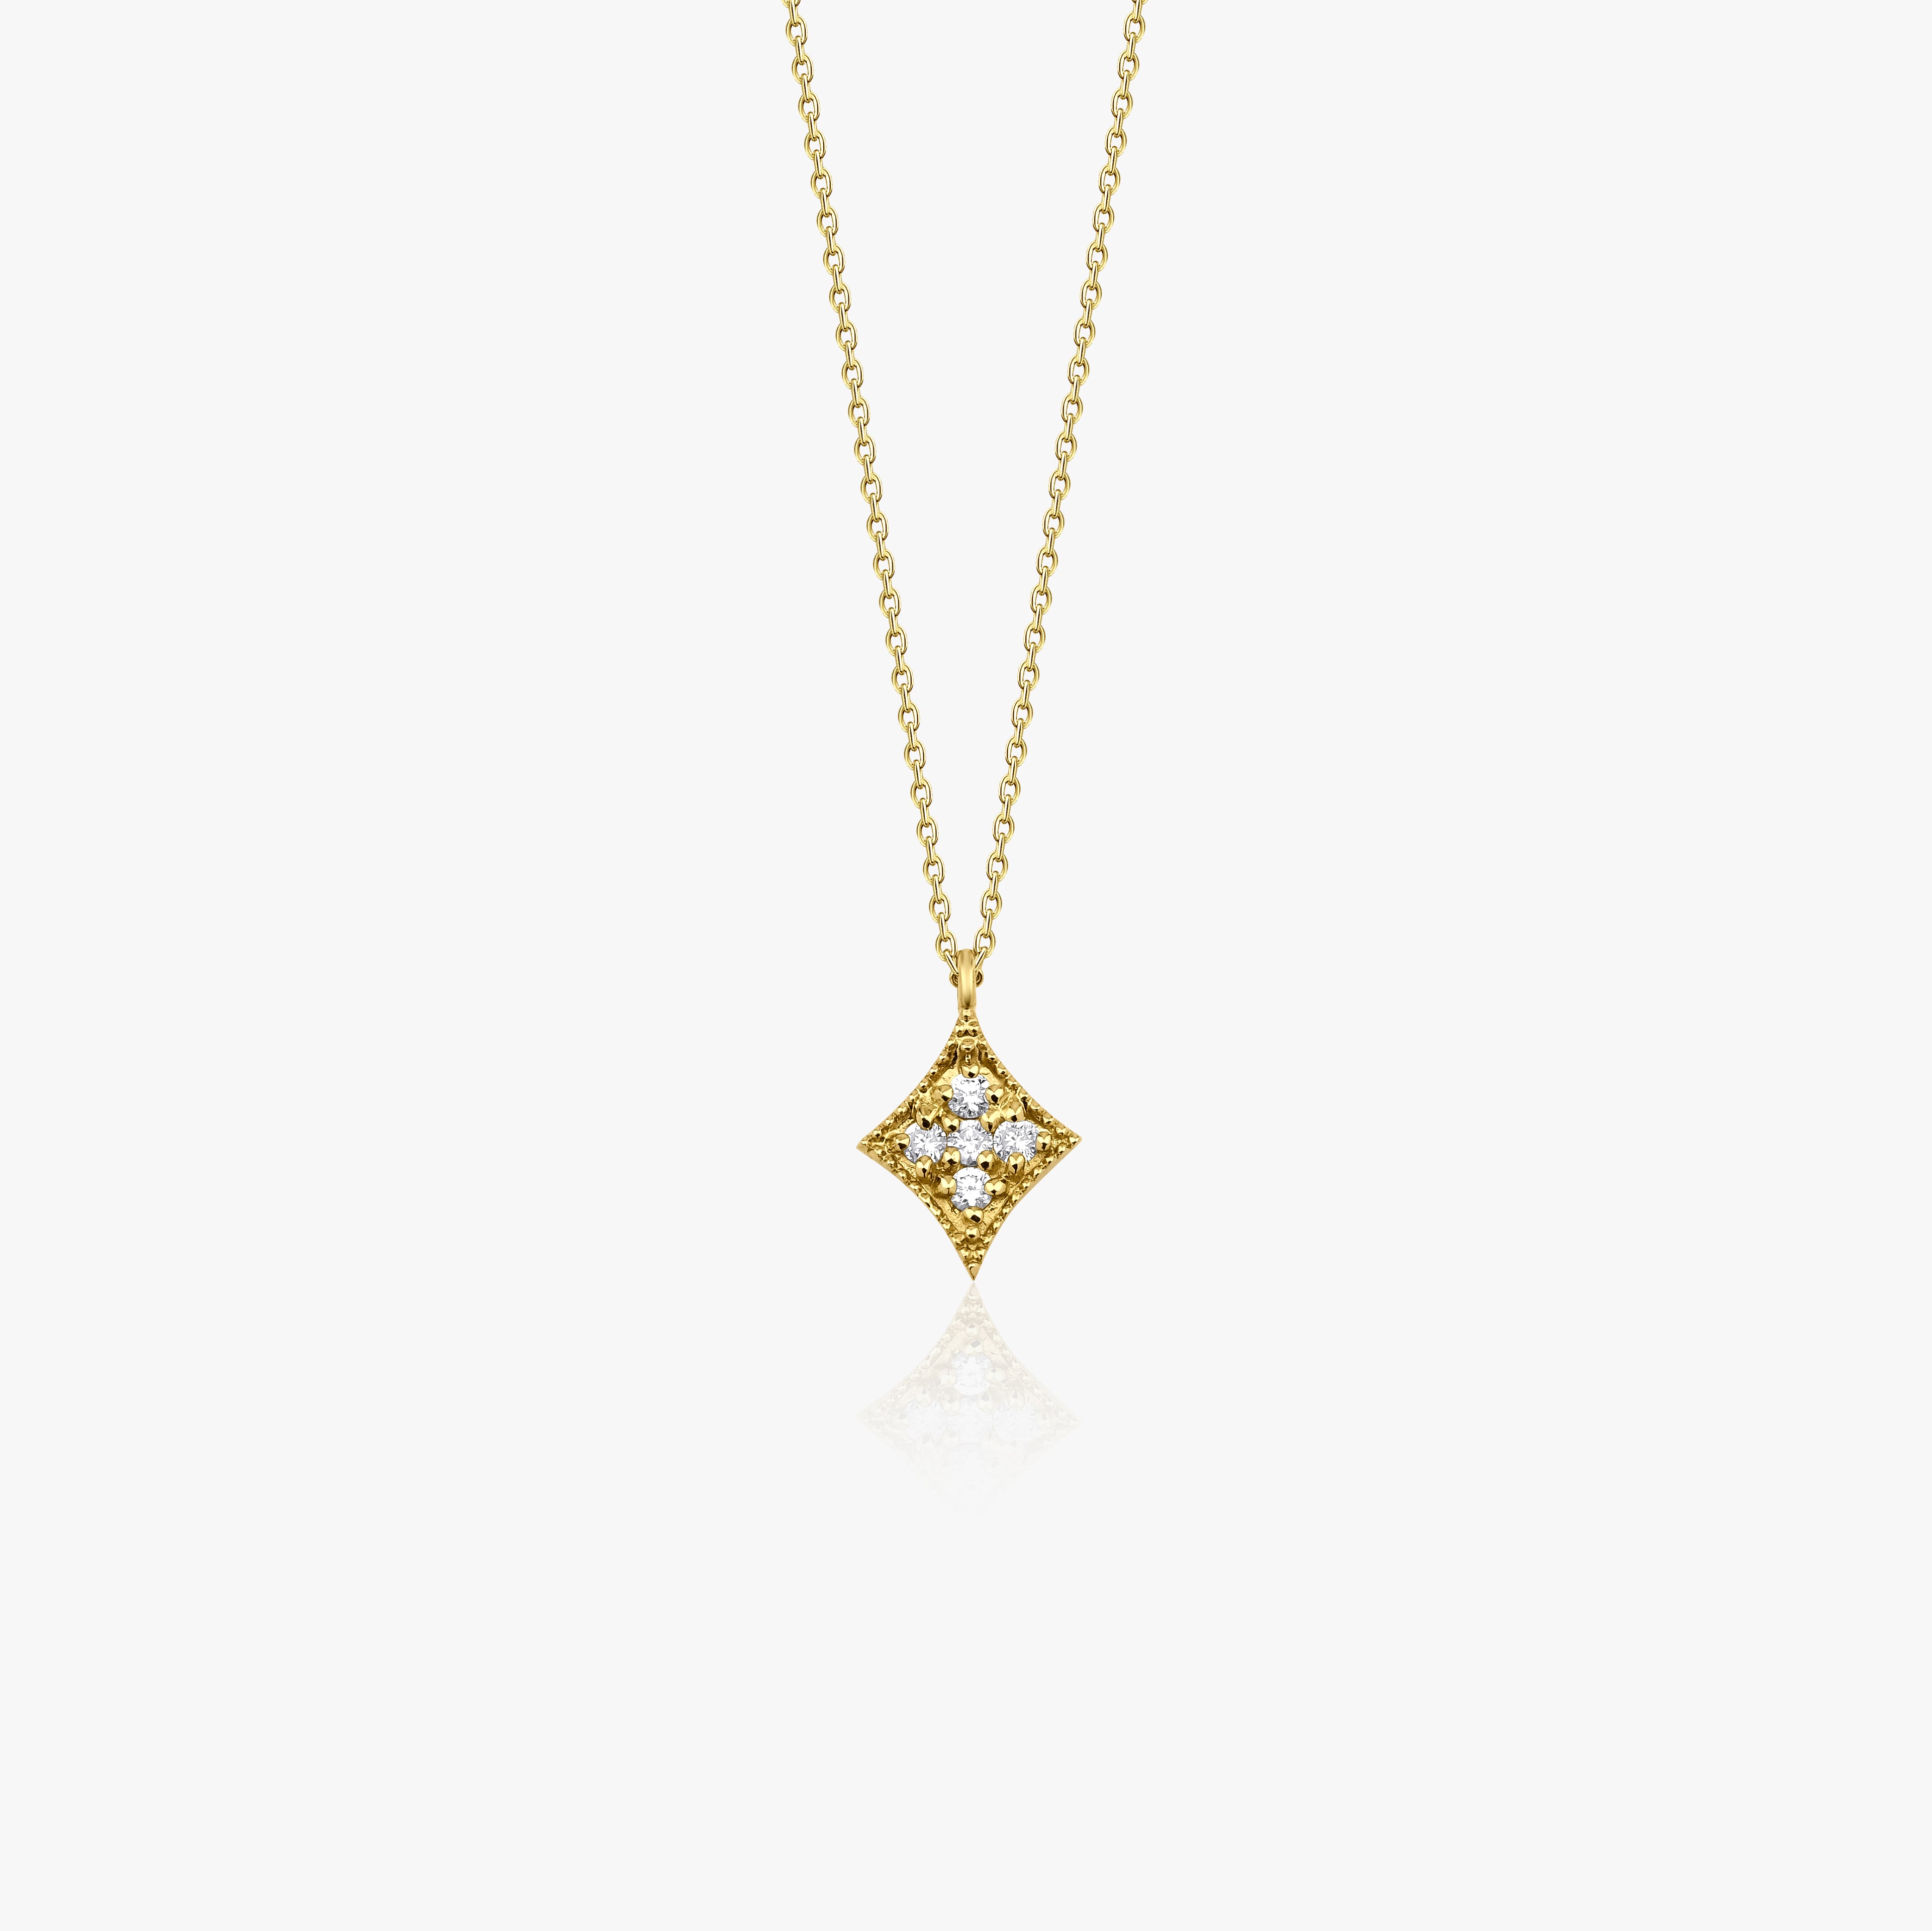 Tiny Diamond Necklace Available in 14K and 18K Gold